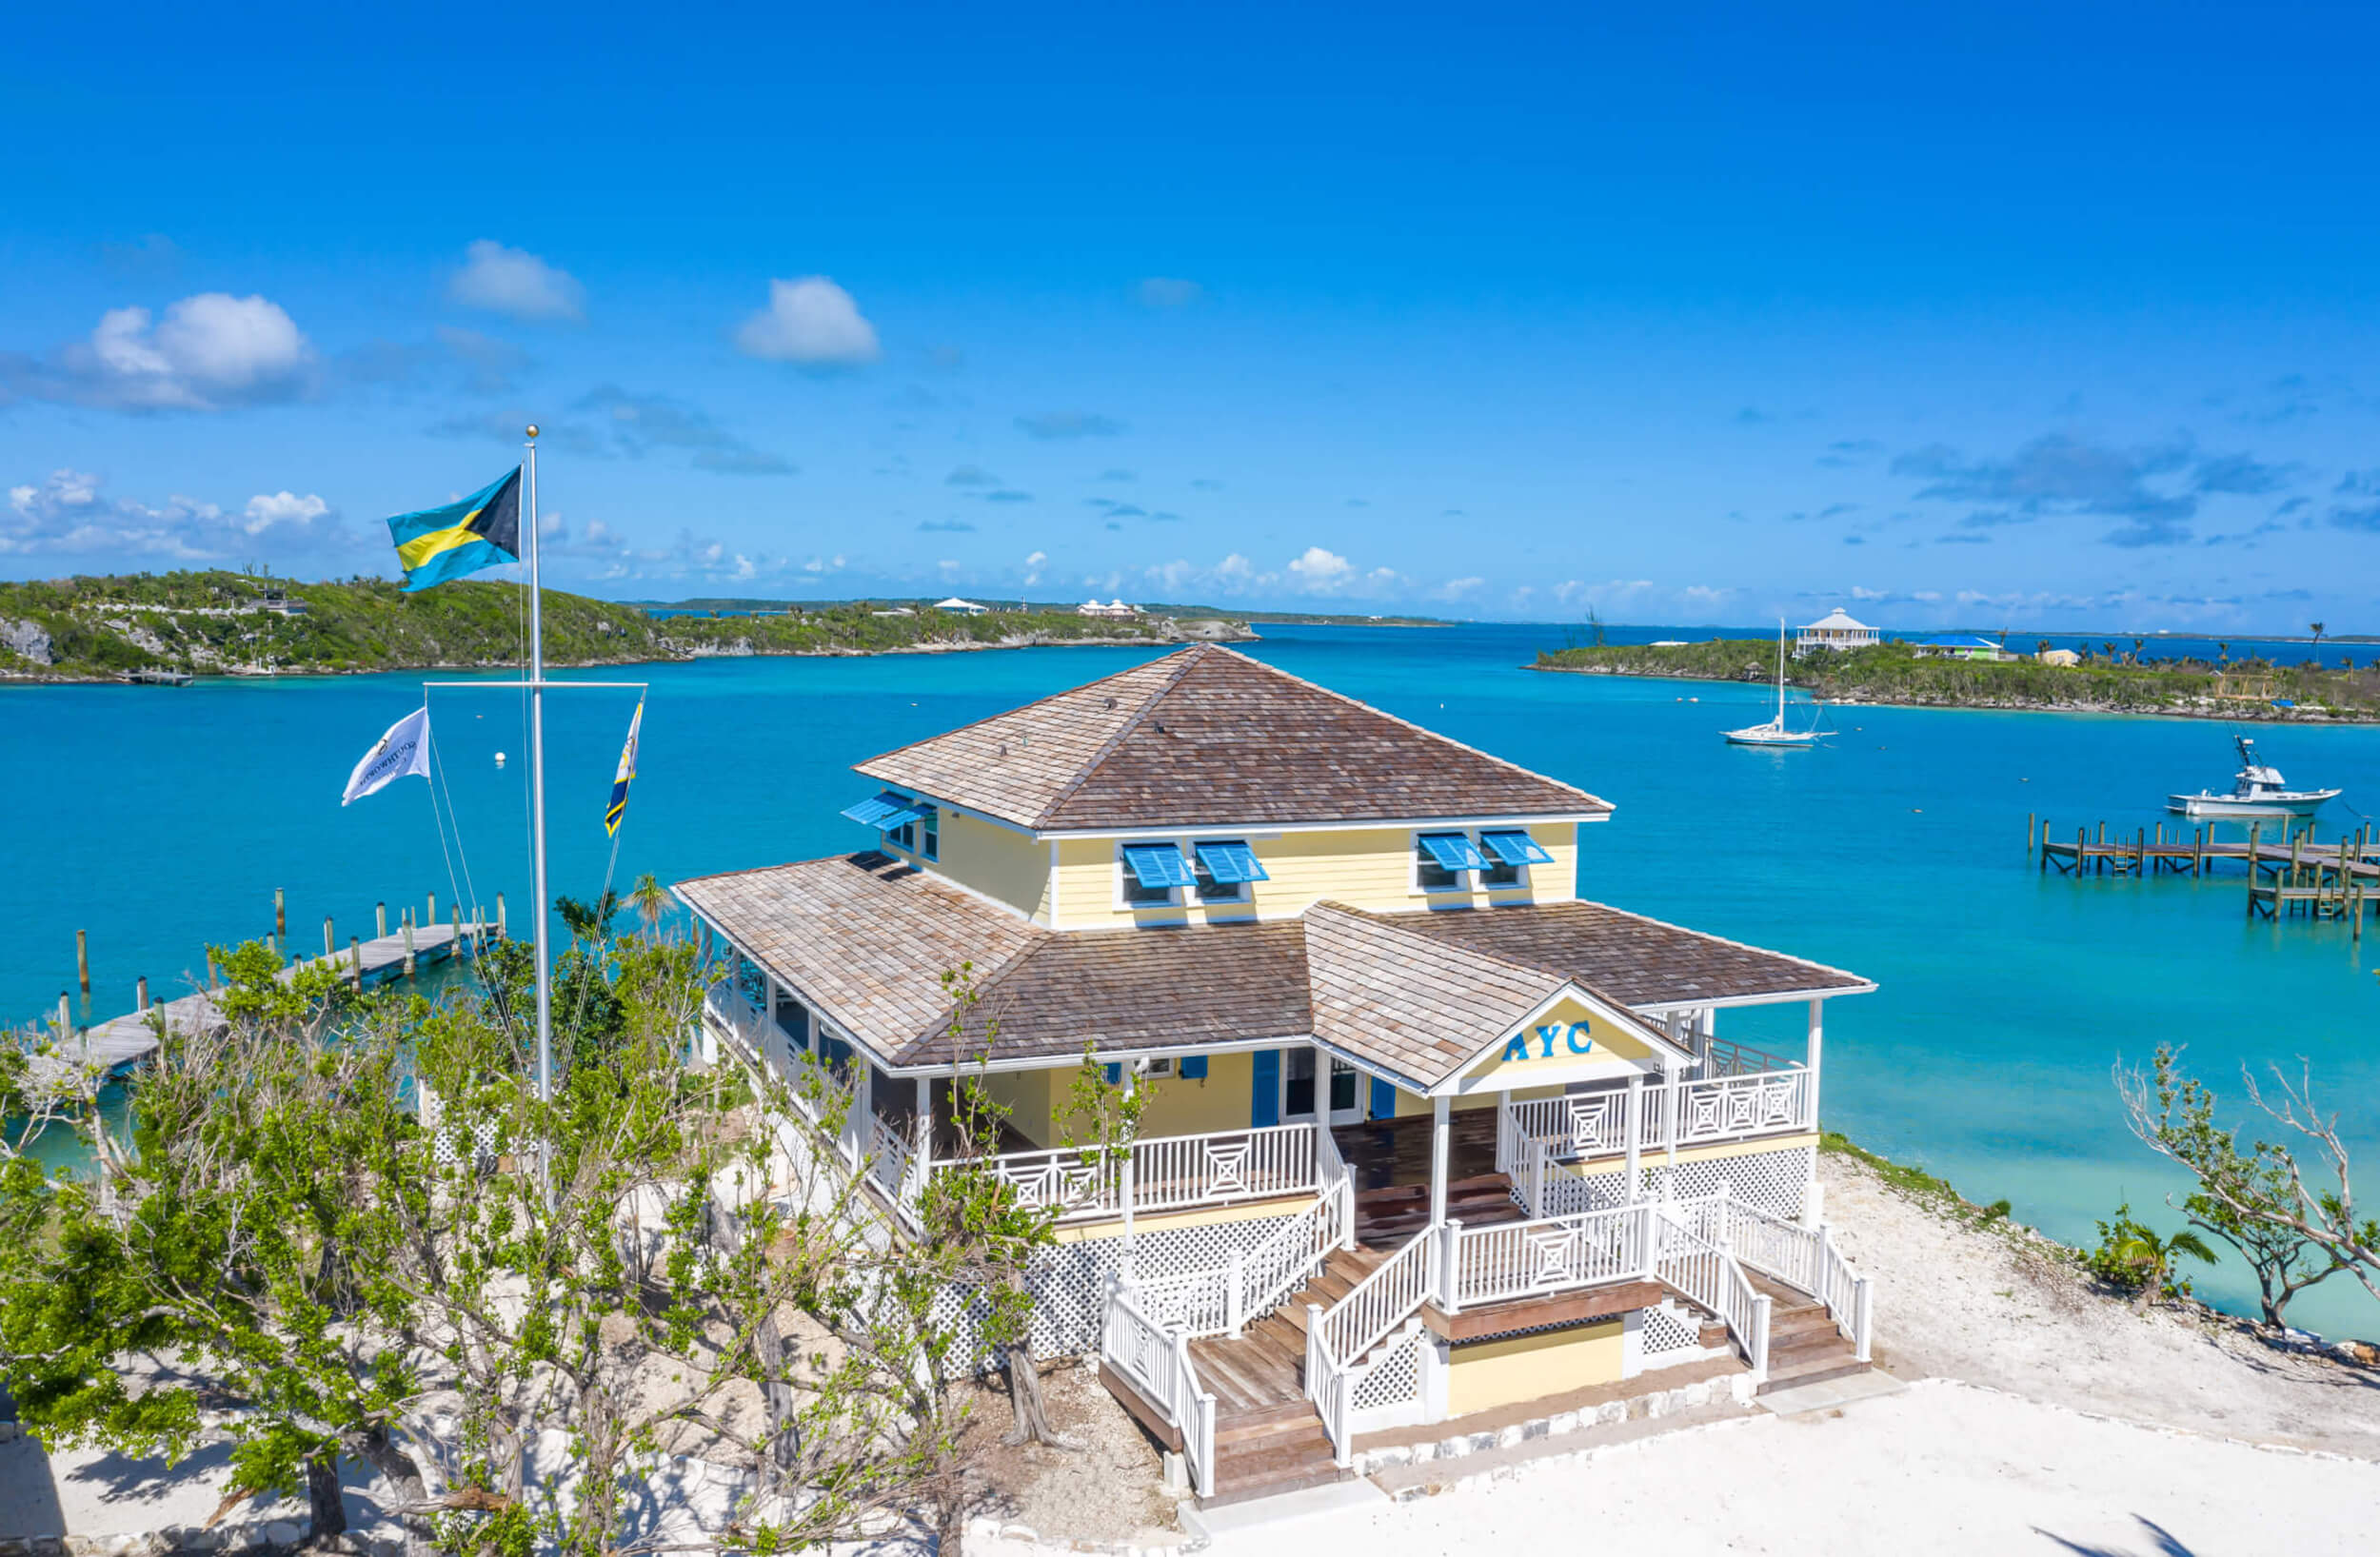 The Abaco yacht club and the crystal-clear Bahamian waters, highlighting exclusive club lifestyle.